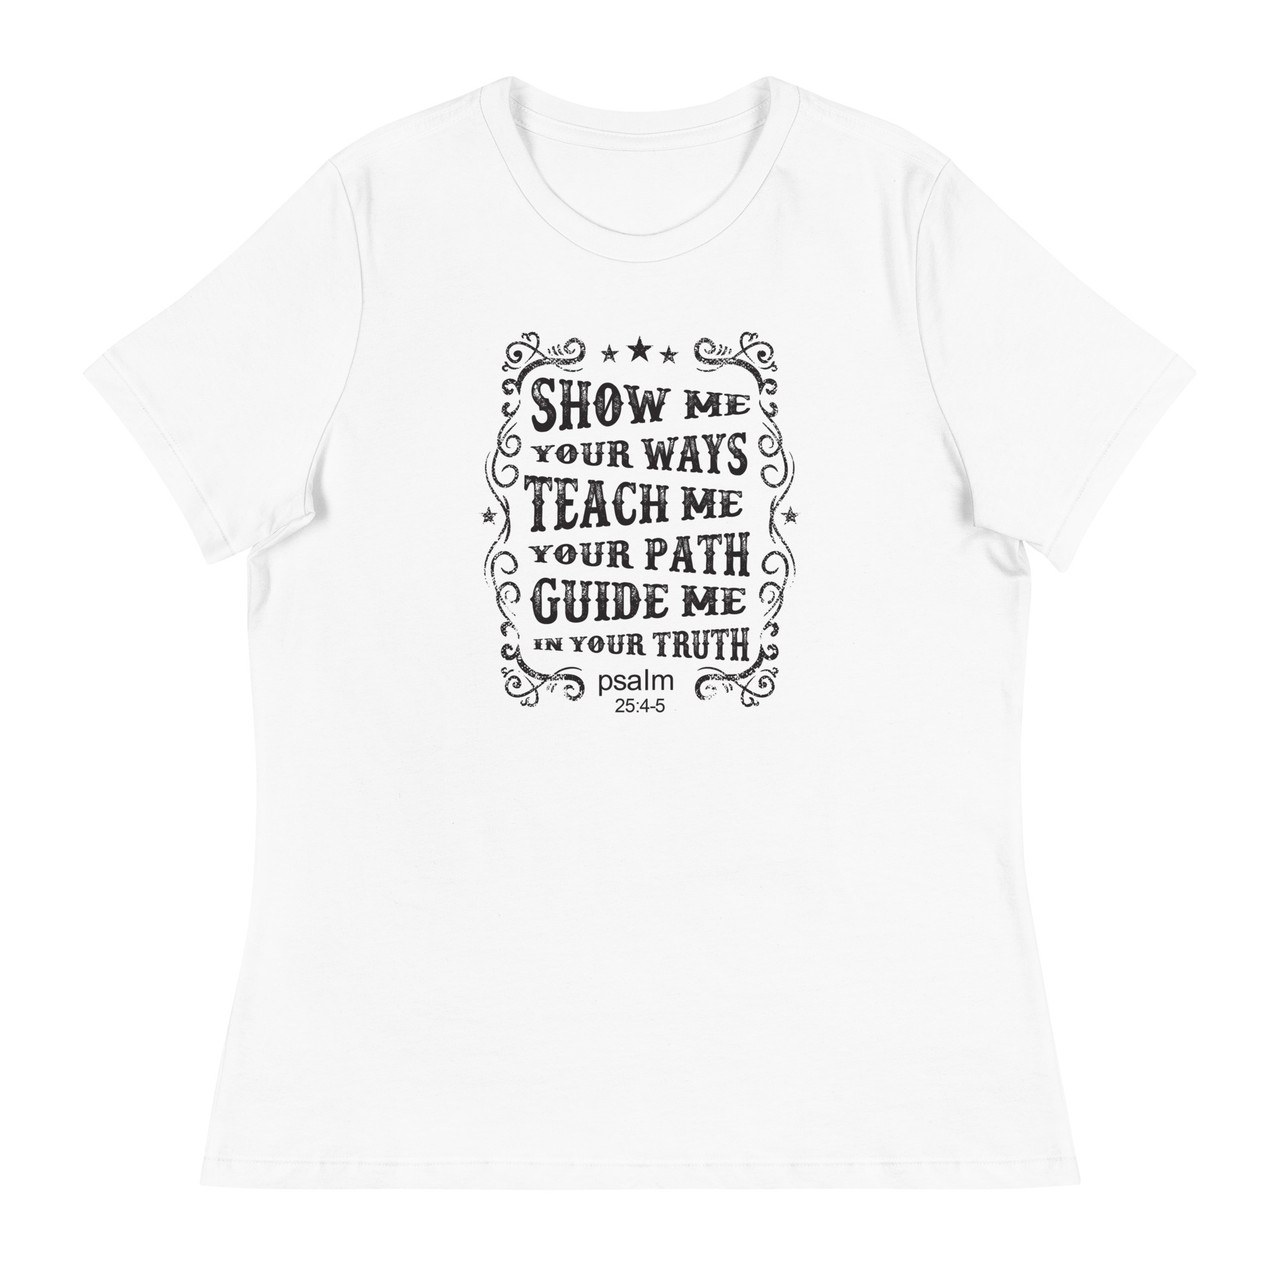 Show Me Your Ways Women's Relaxed T-Shirt - Bella + Canvas 6400 